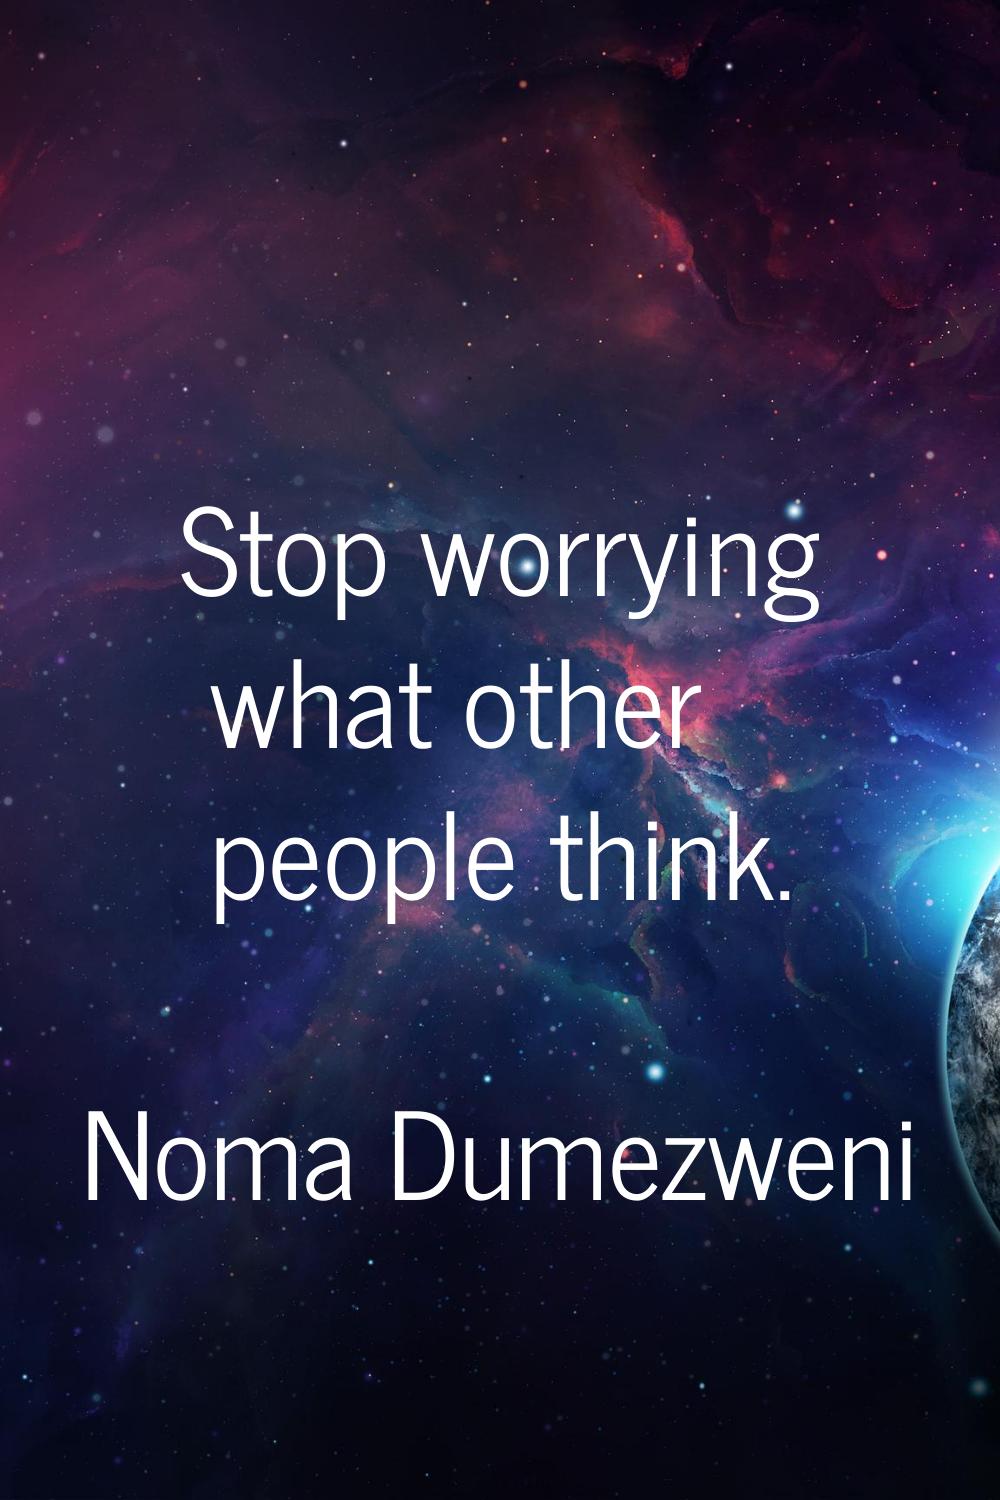 Stop worrying what other people think.